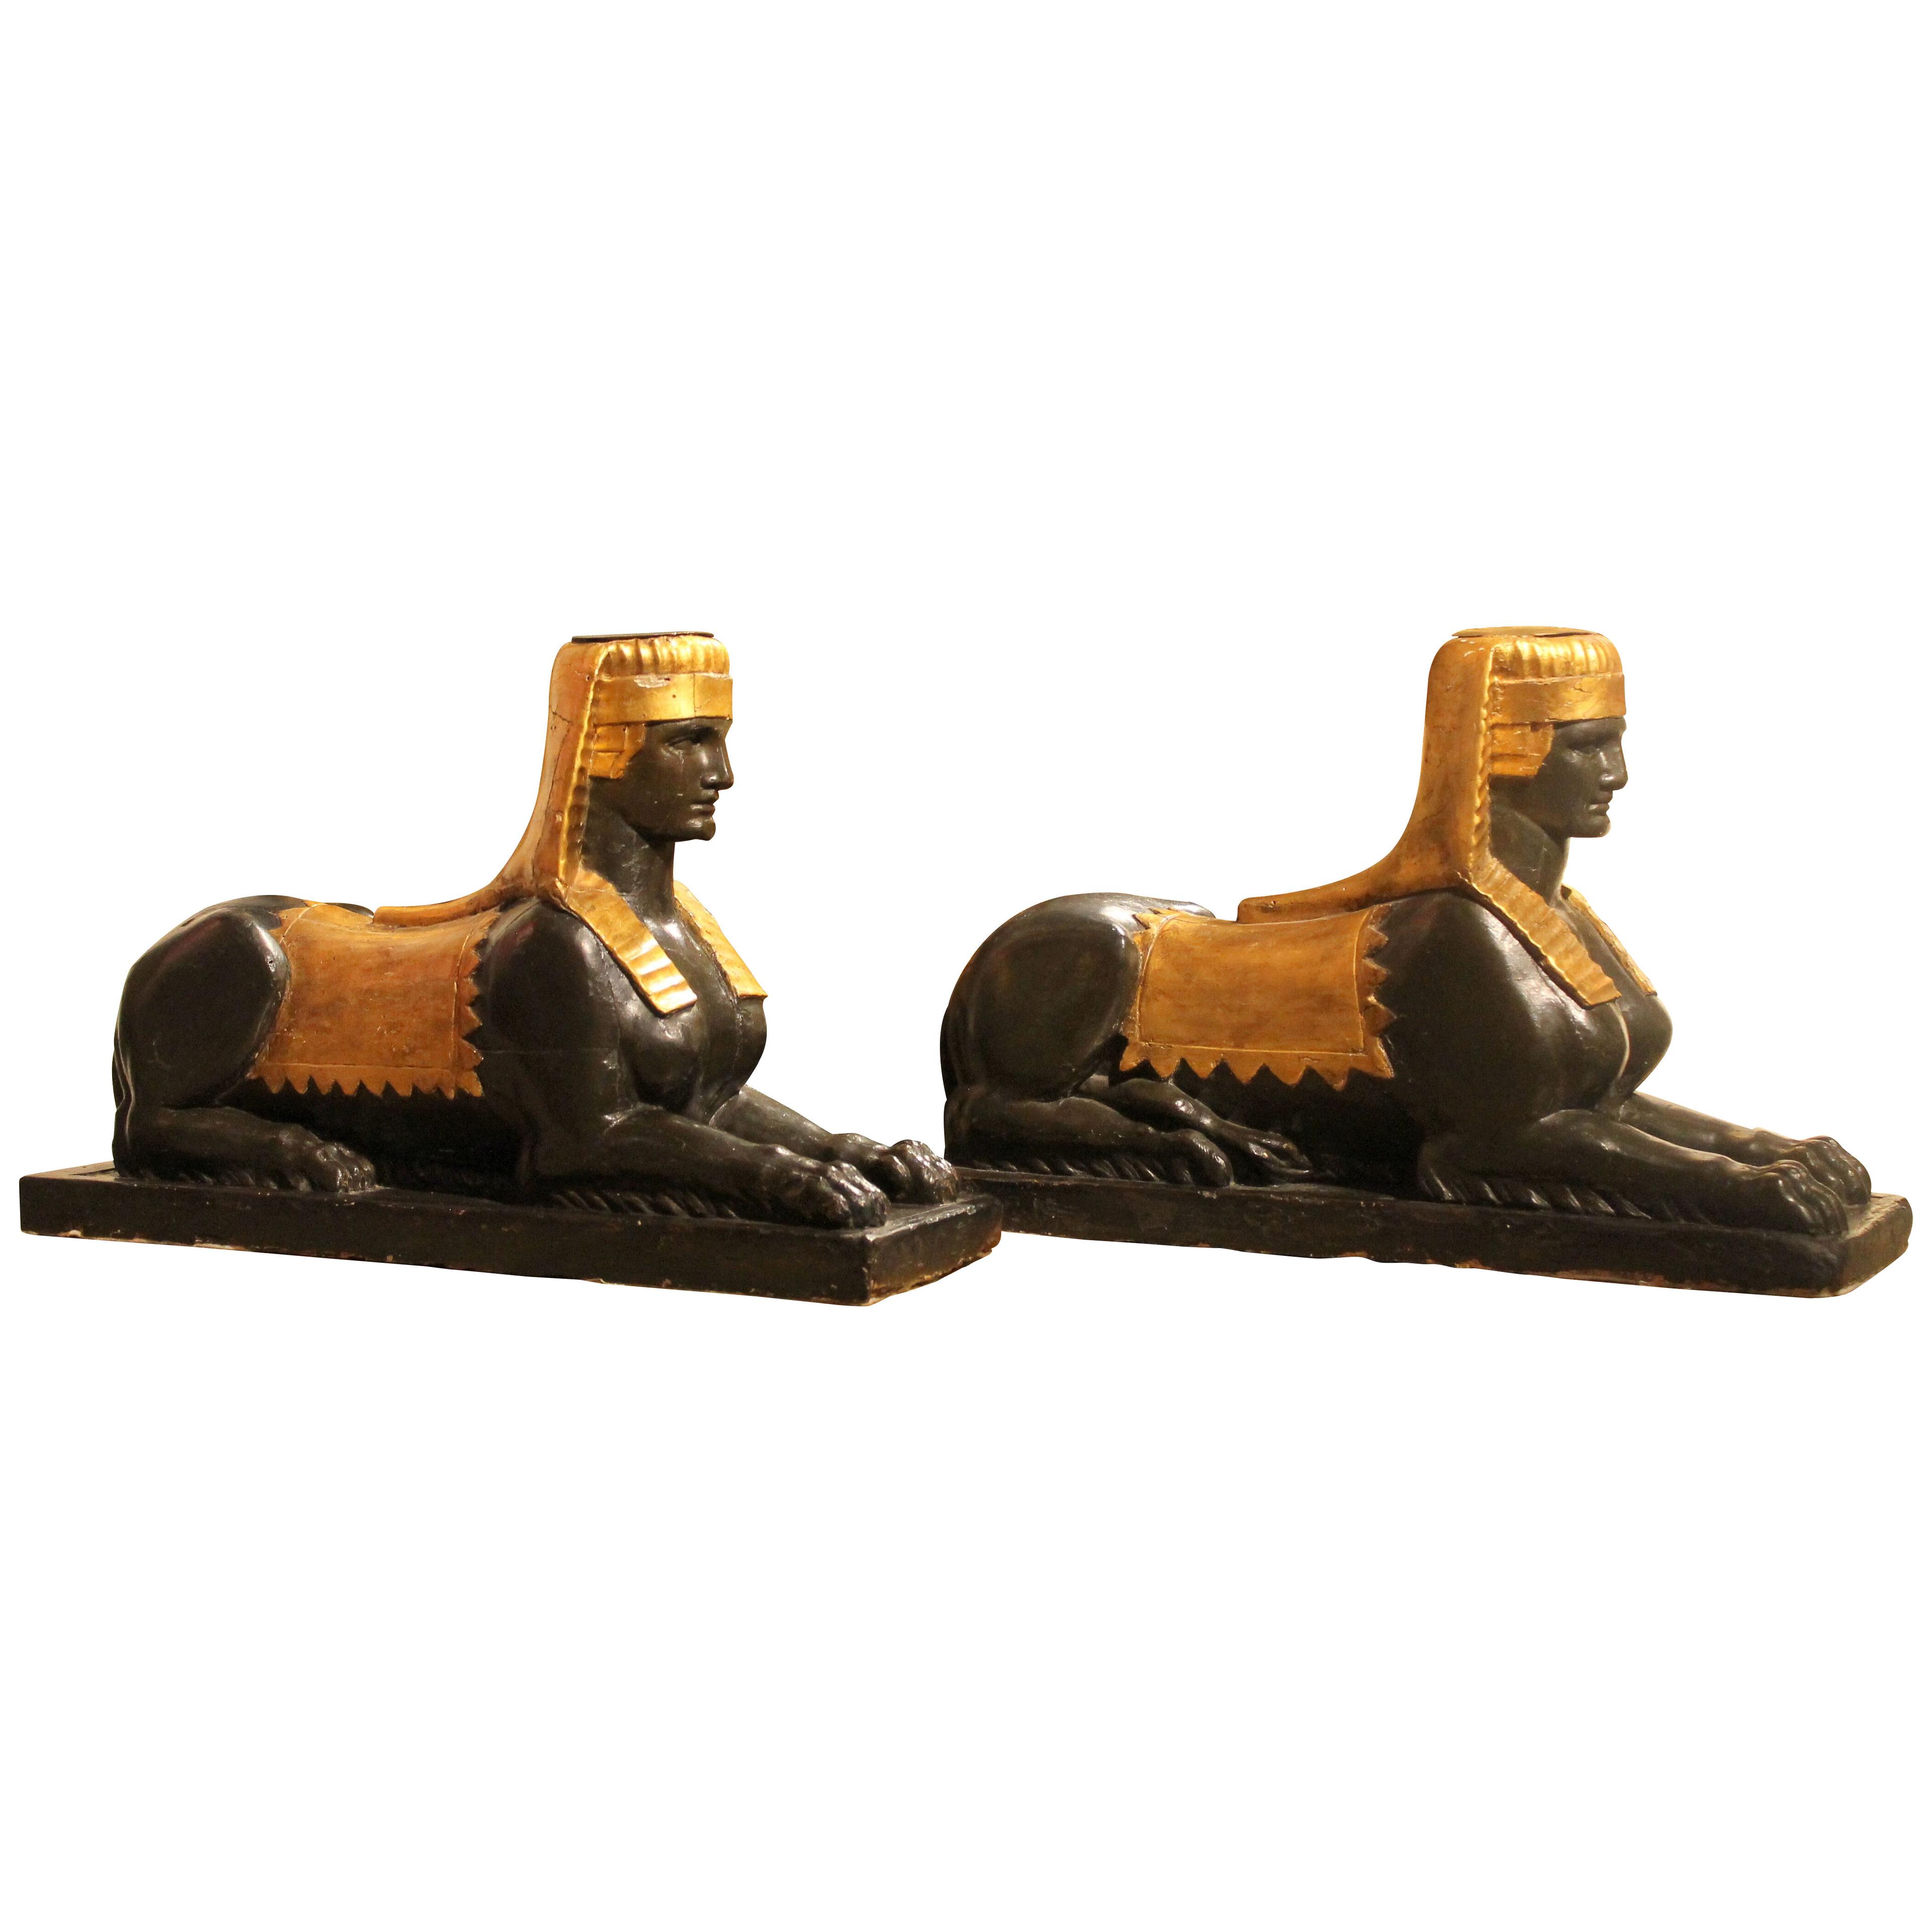 Italian 18th Century Empire Hand Carved, Lacquer and Gilt Wood Sphinx Sculptures